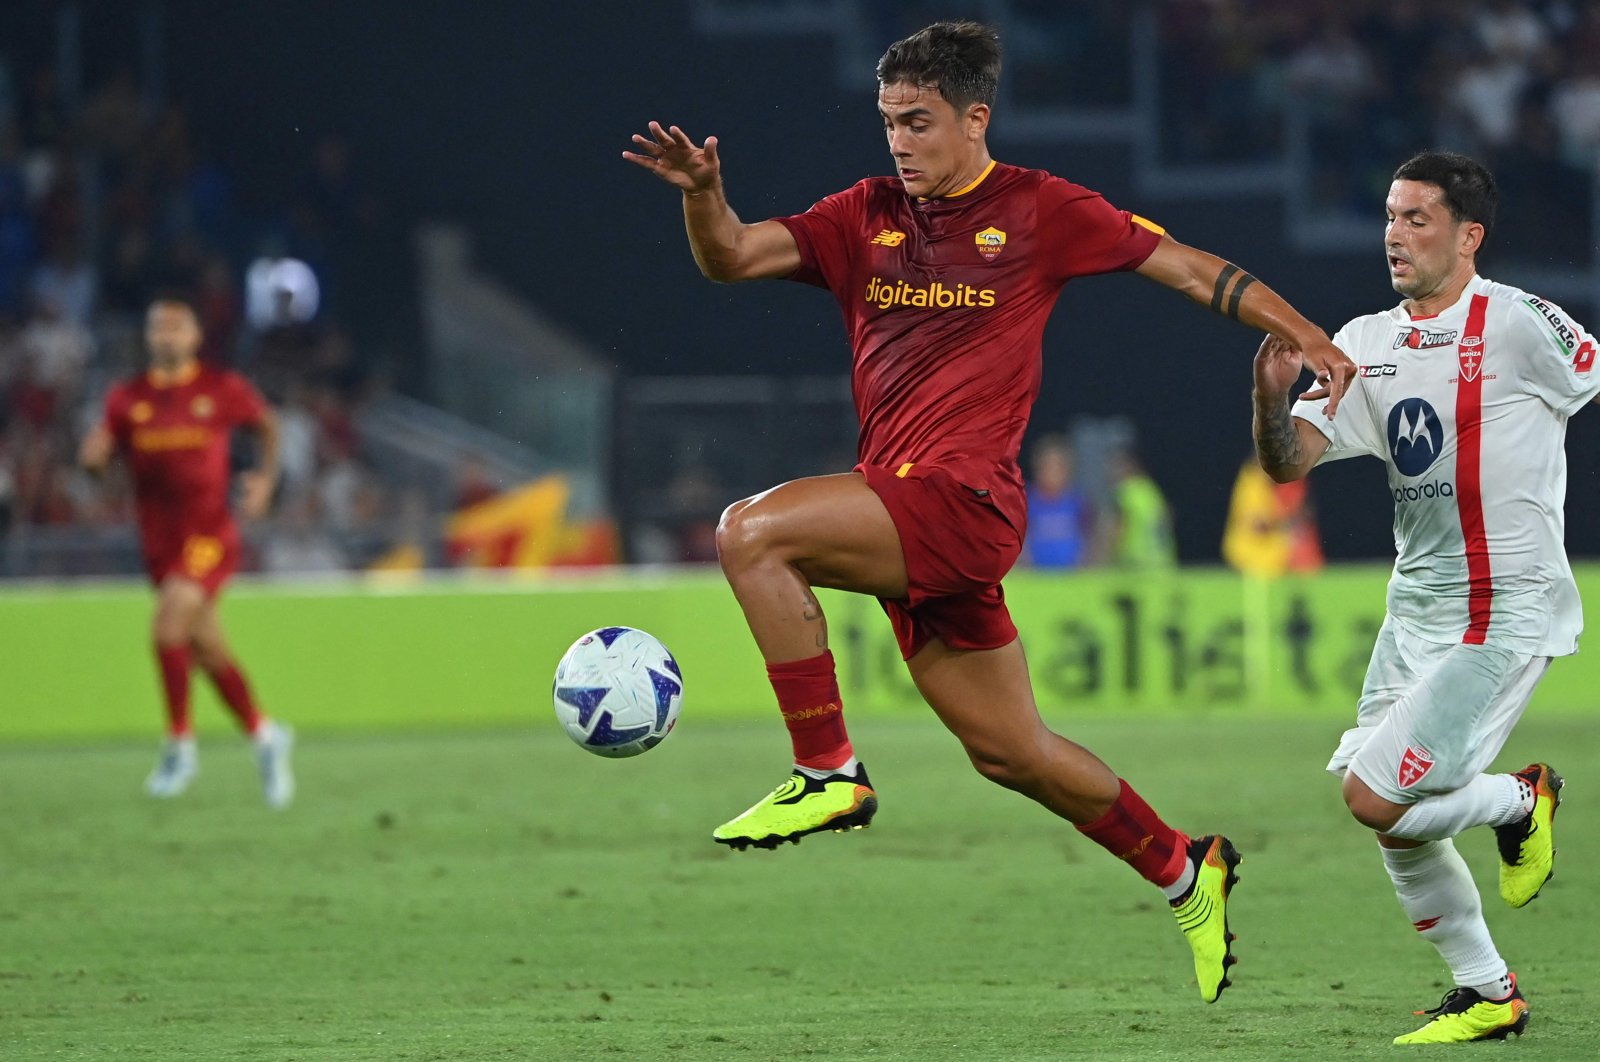 AS Roma&#039;s Paulo Dybala in action against Monza in a Serie A match, Rome, Italy, Aug. 30, 2022. (AFP Photo)